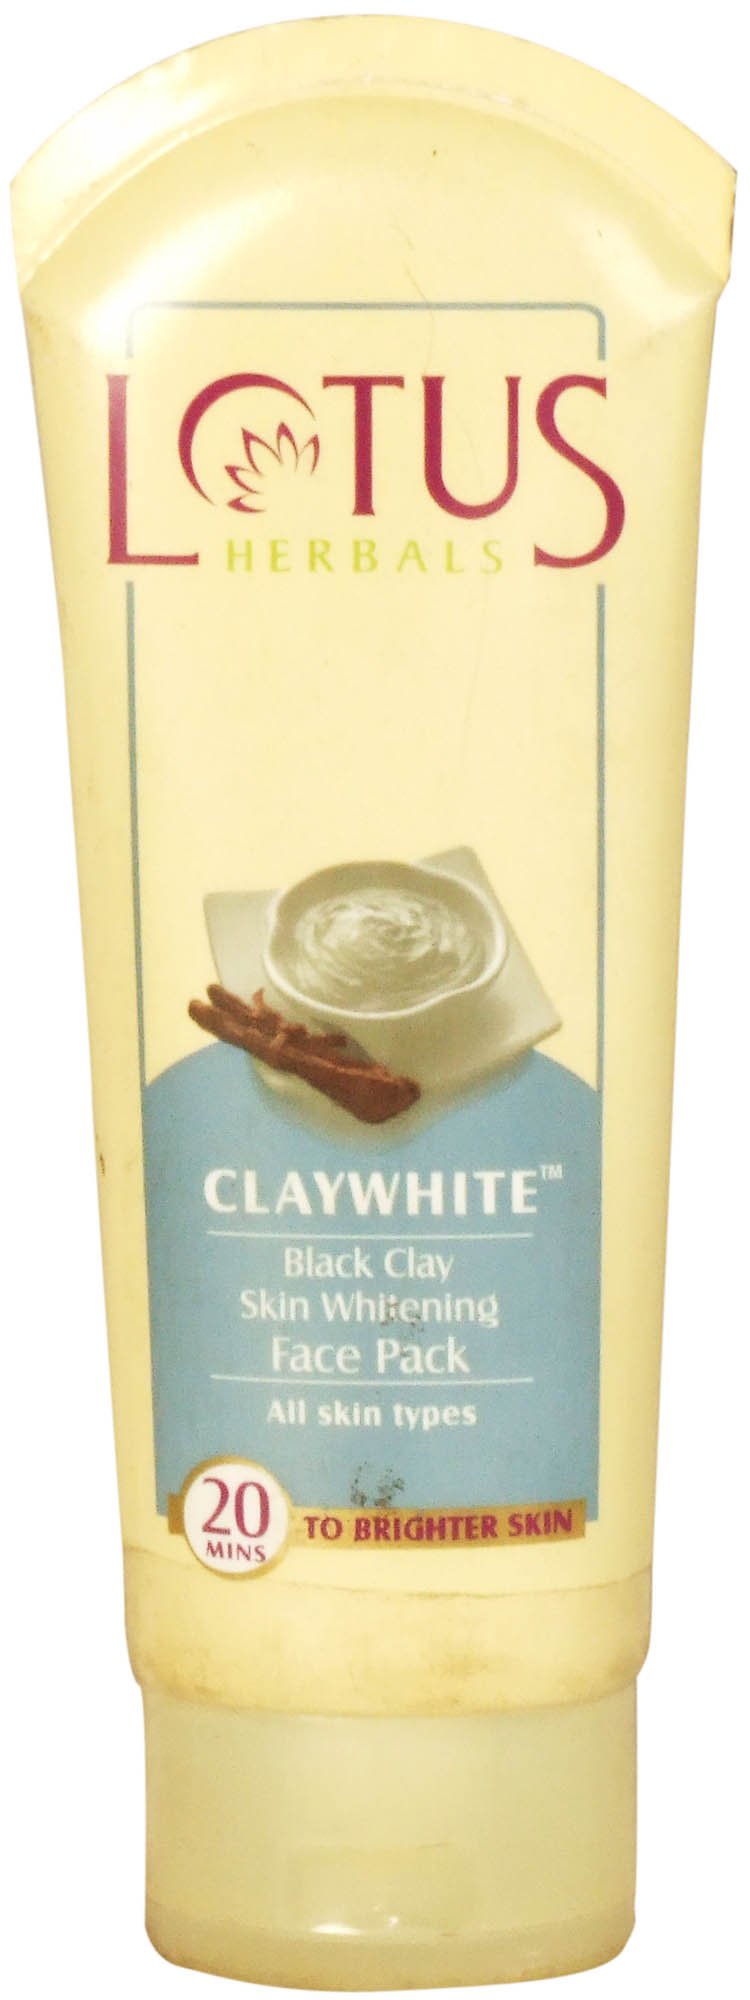 Claywhite Black Clay Skin Whitening Face Pack (All Skin Types) - book cover